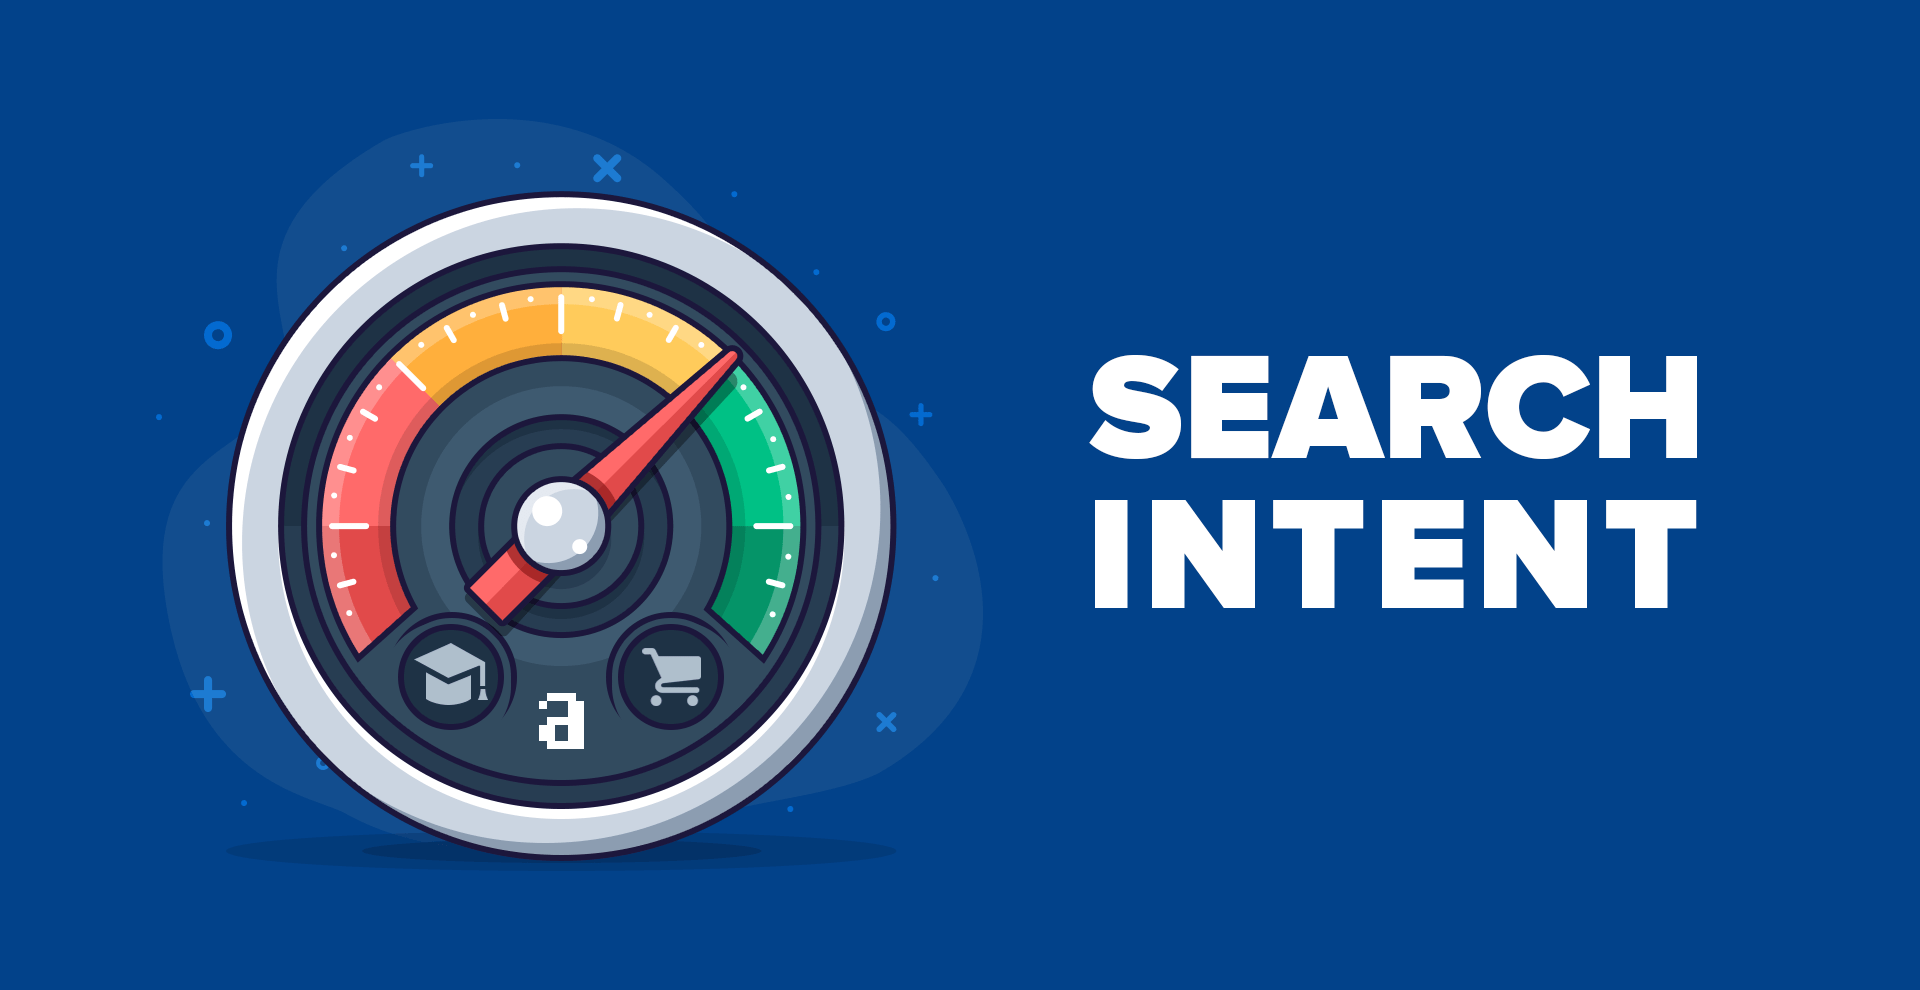 Understand the Search Intent for Your Keywords